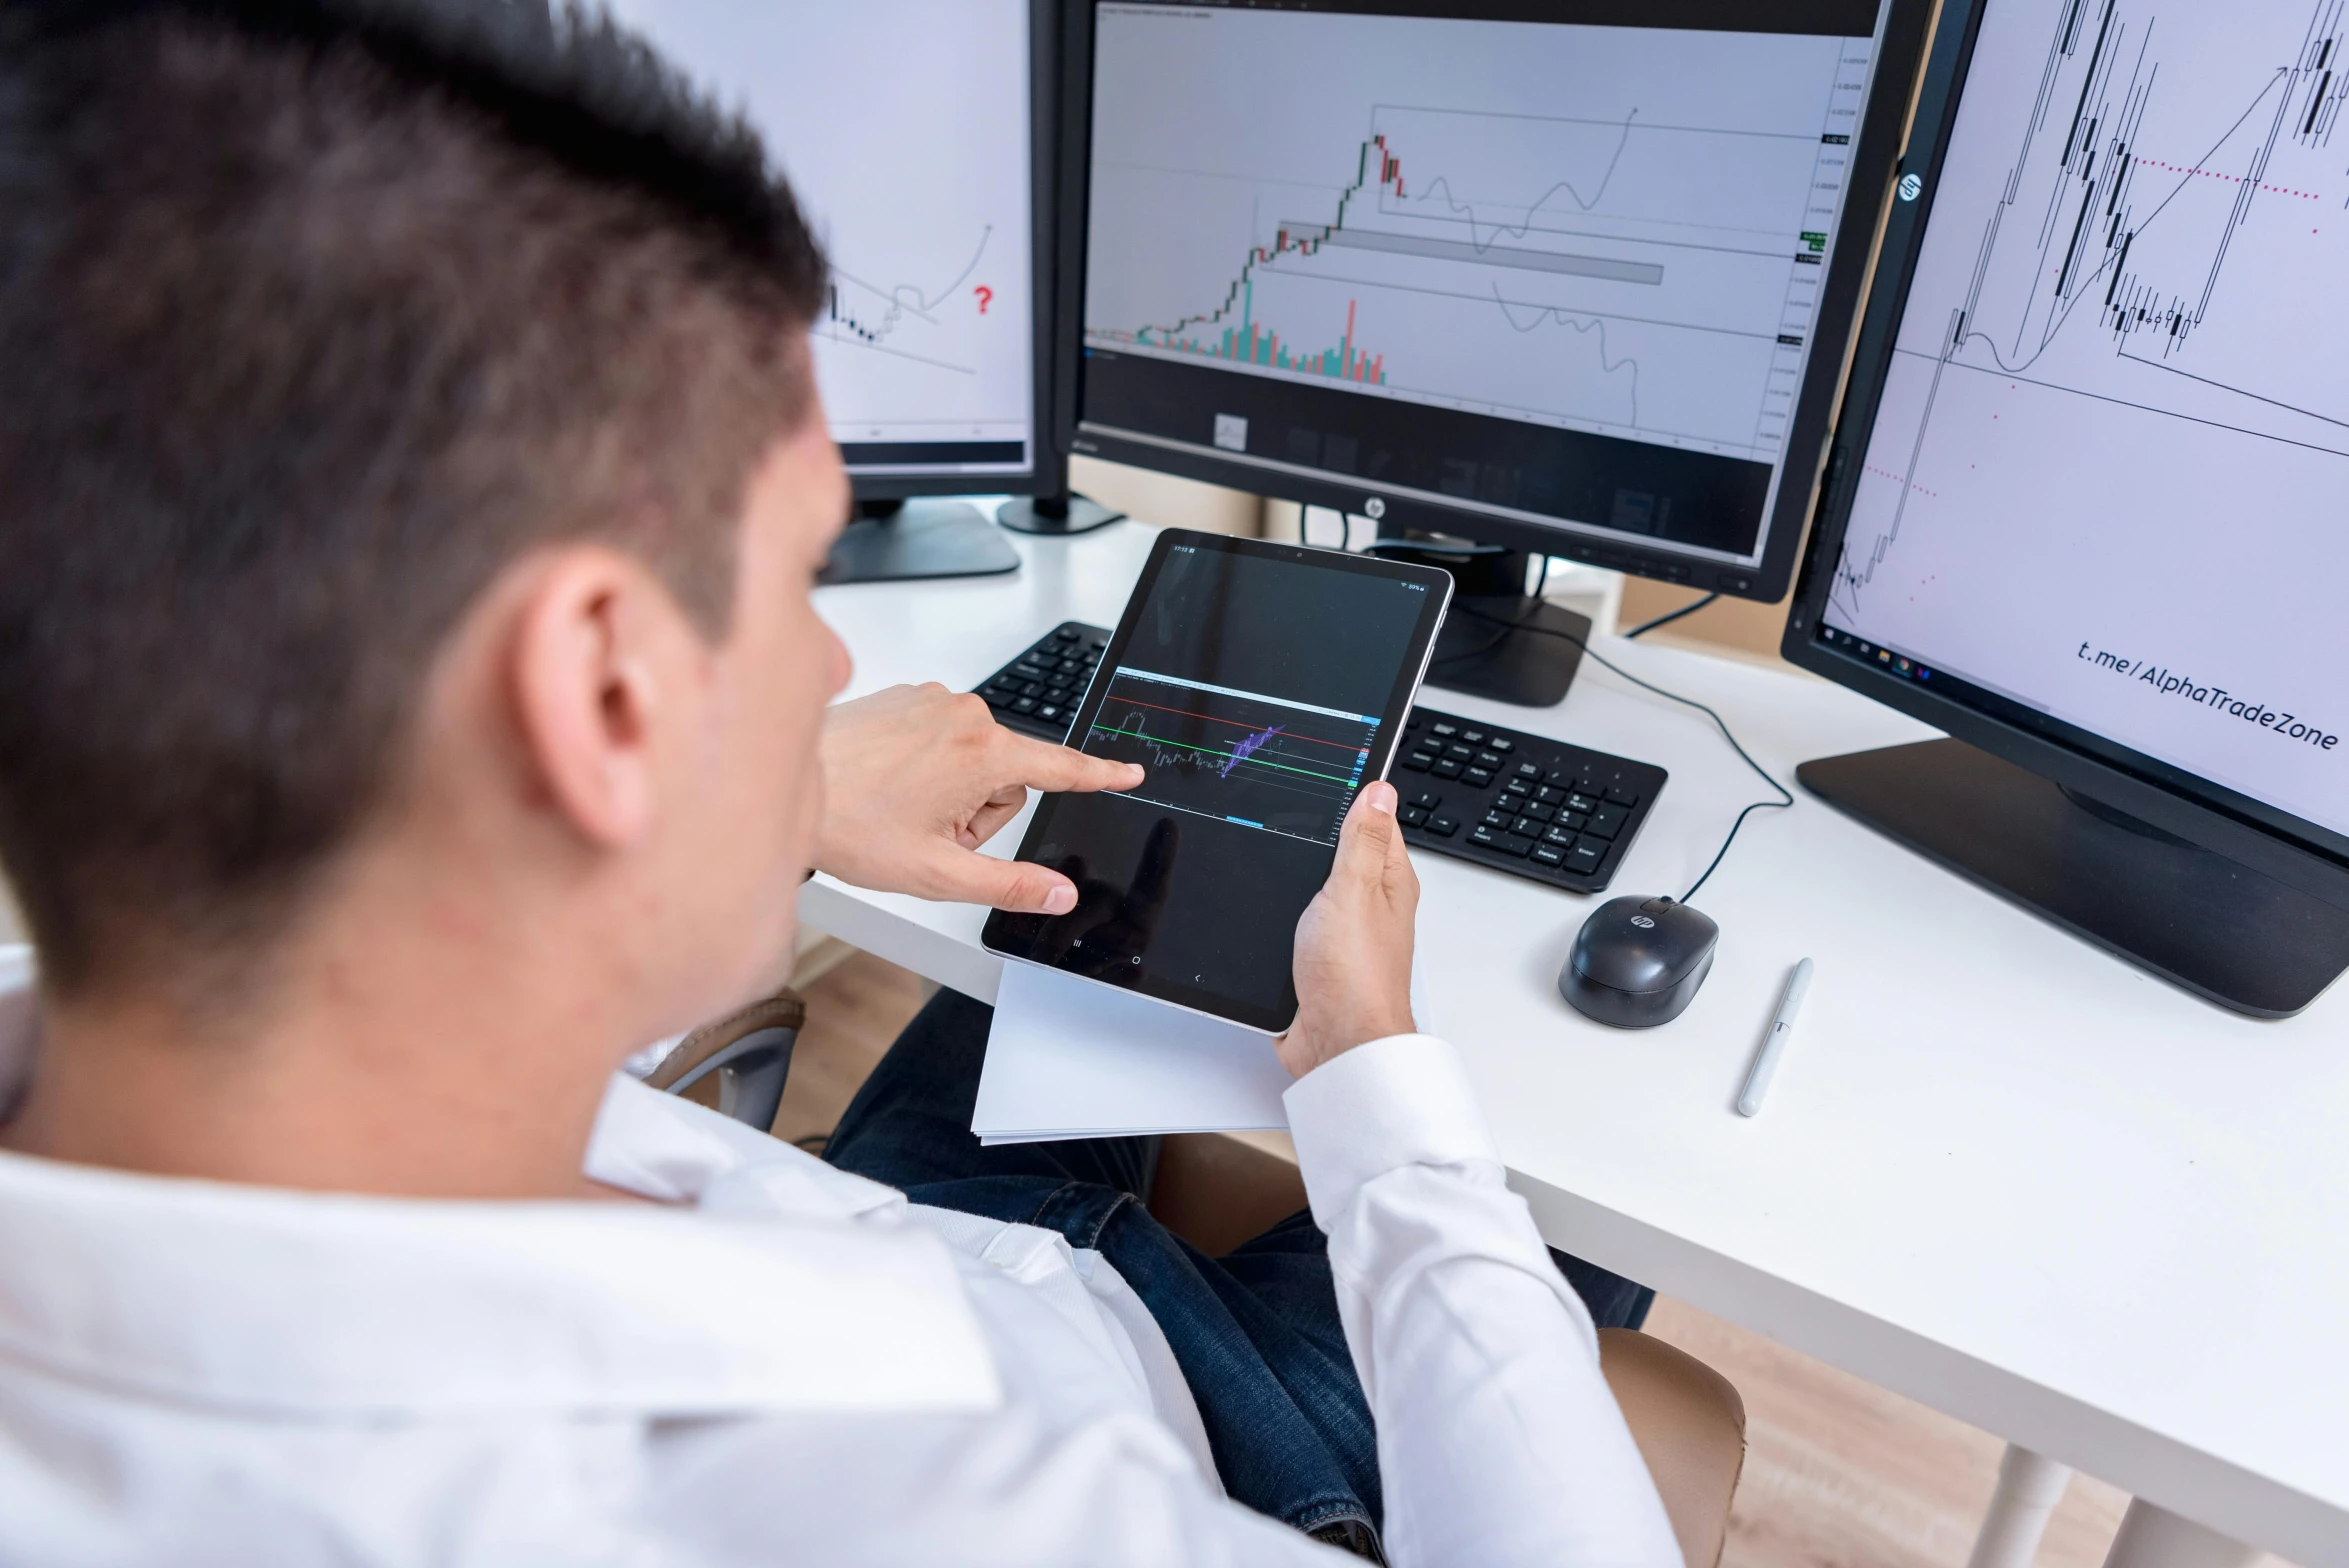 a man sitting at a desk using a tablet computer, analytical art, trading stocks, qirex, instagram photo, thumbnail